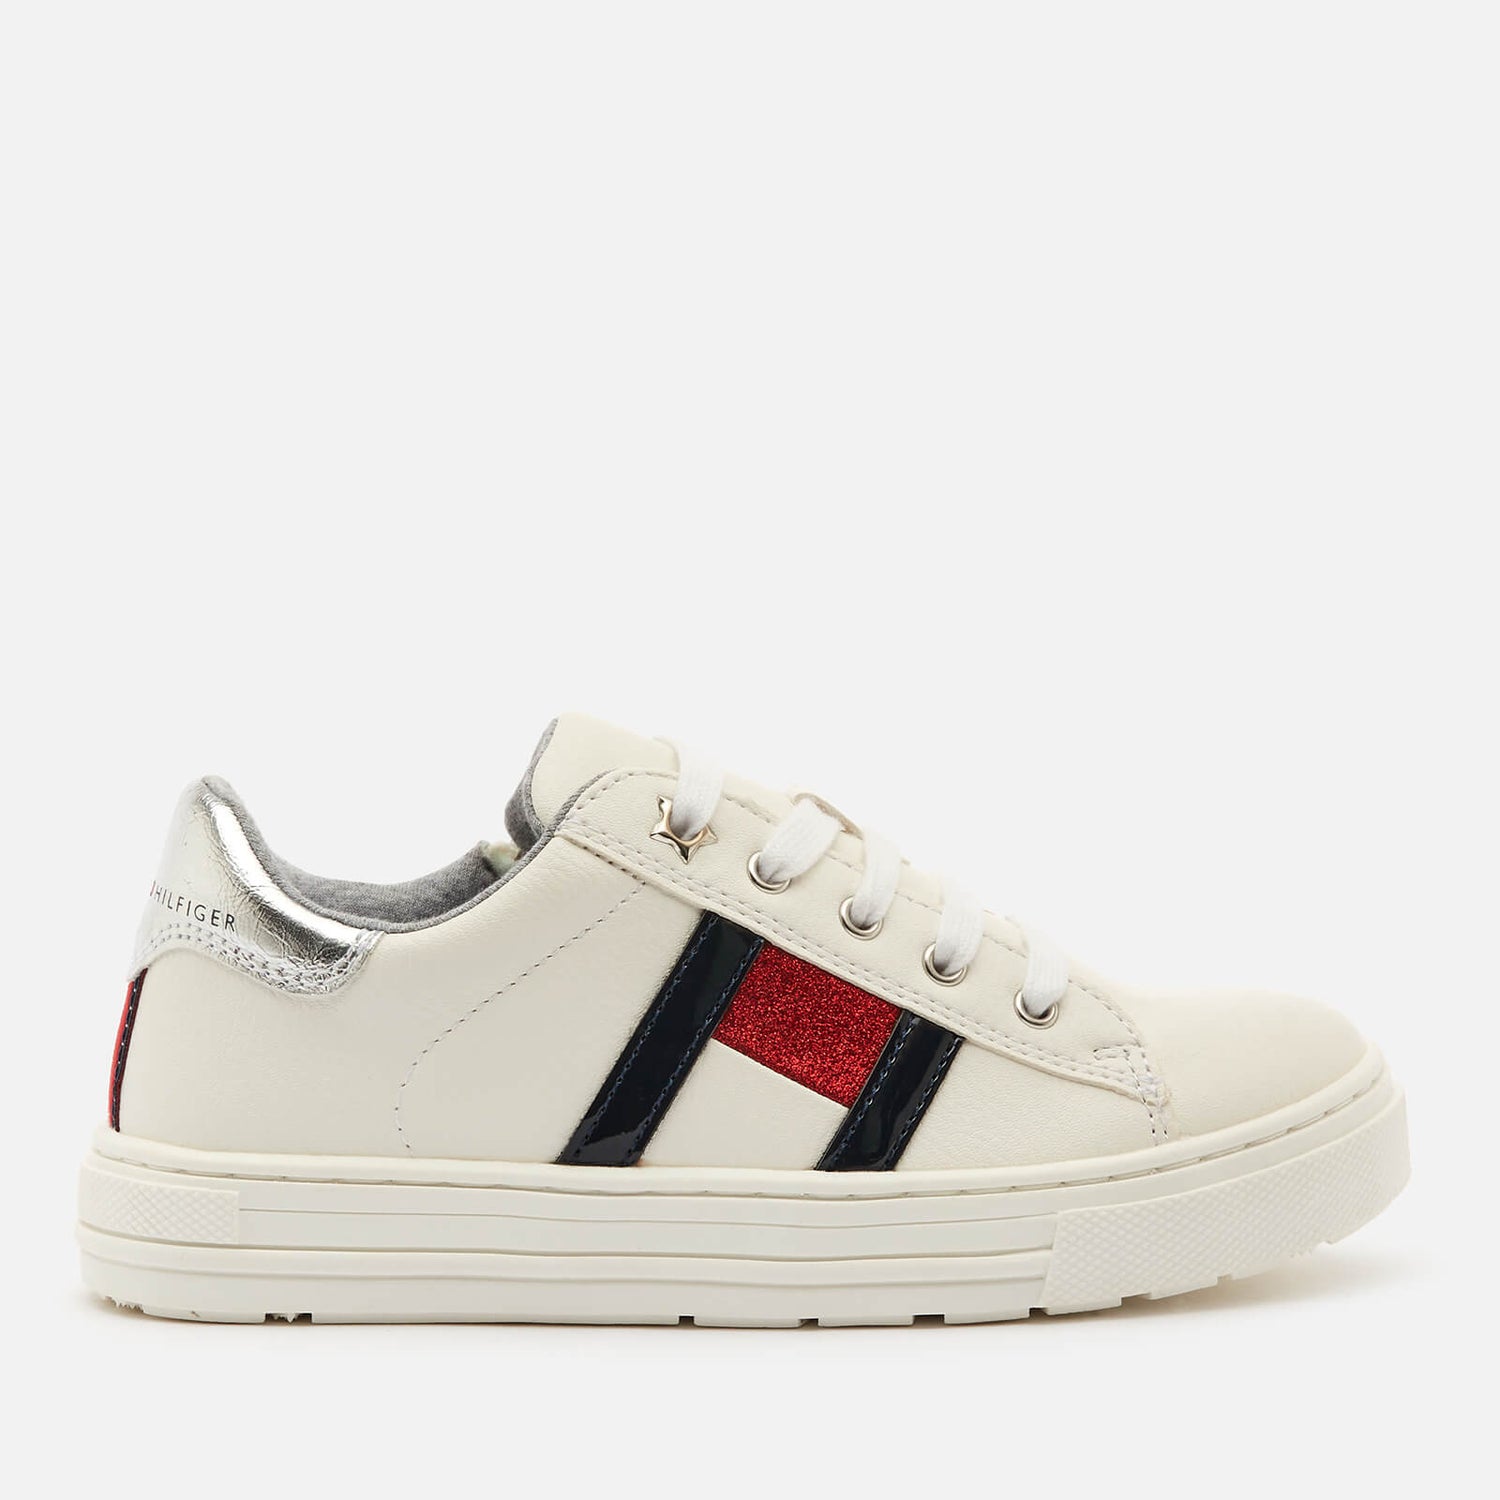 Tommy Hilfiger Kids' Low Cut Lace Up Sneakers - White/Multicolour